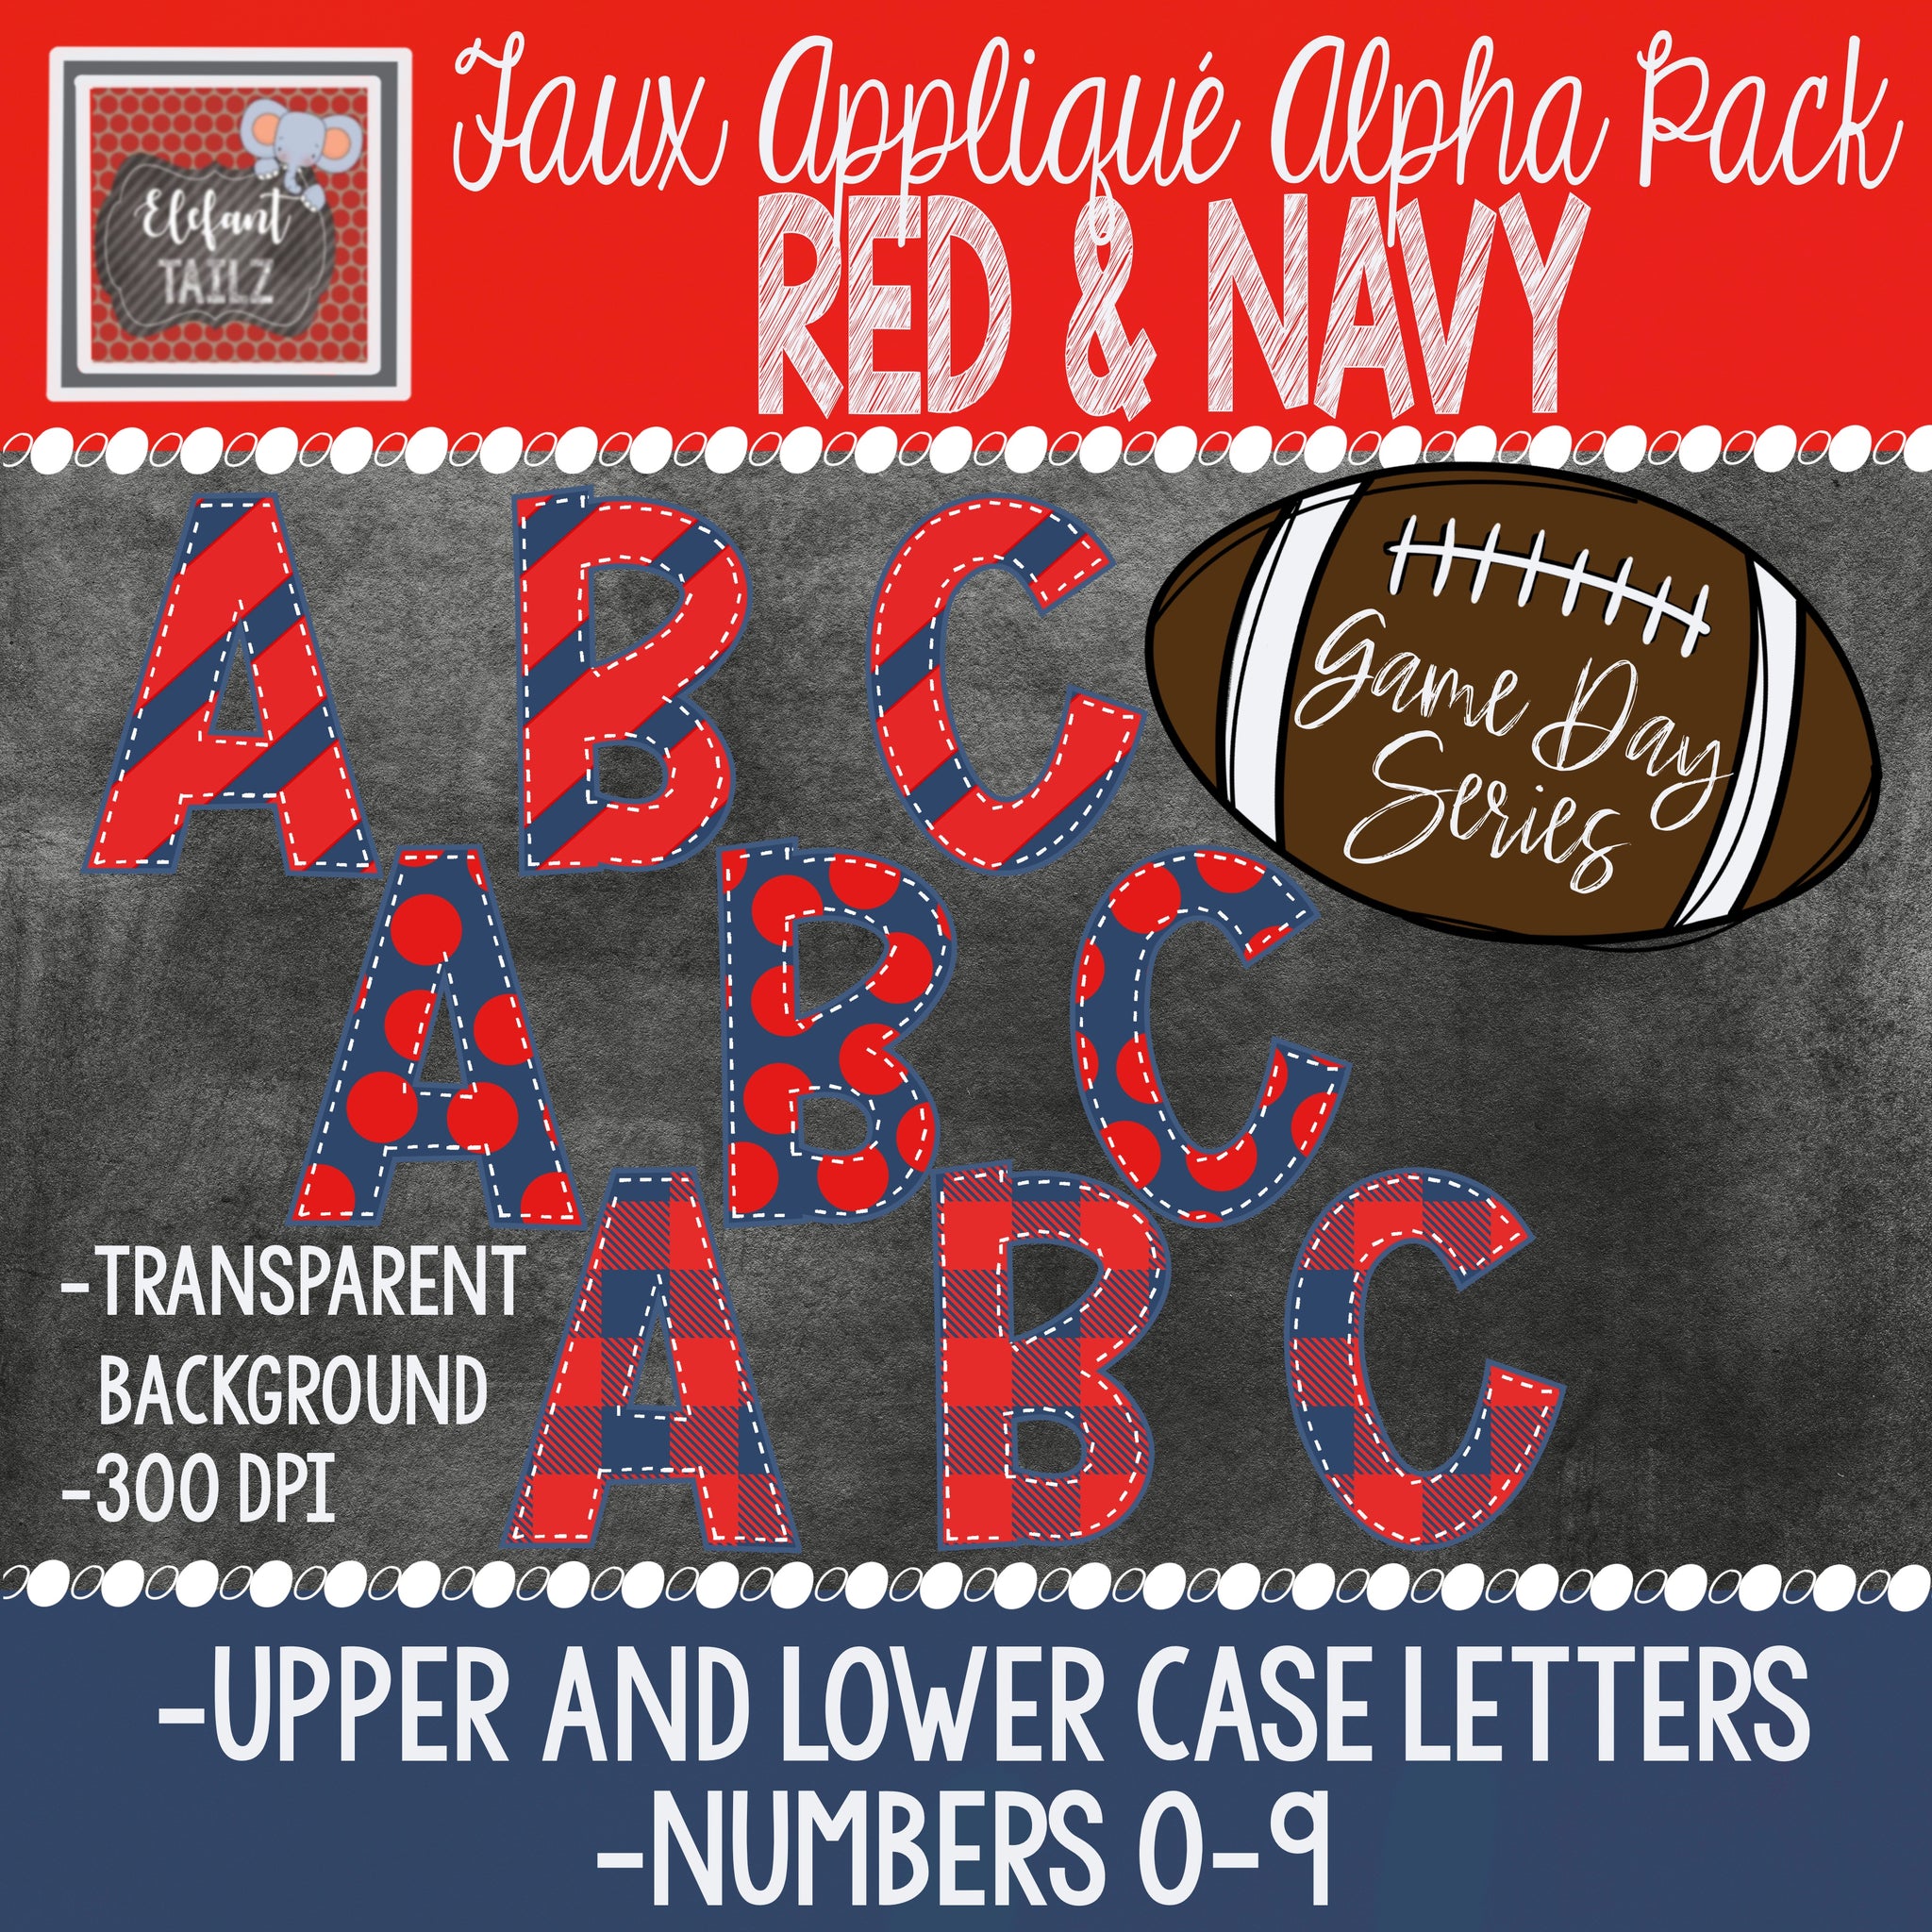 Game Day Series Alpha & Number Pack - Red & Navy Bundle